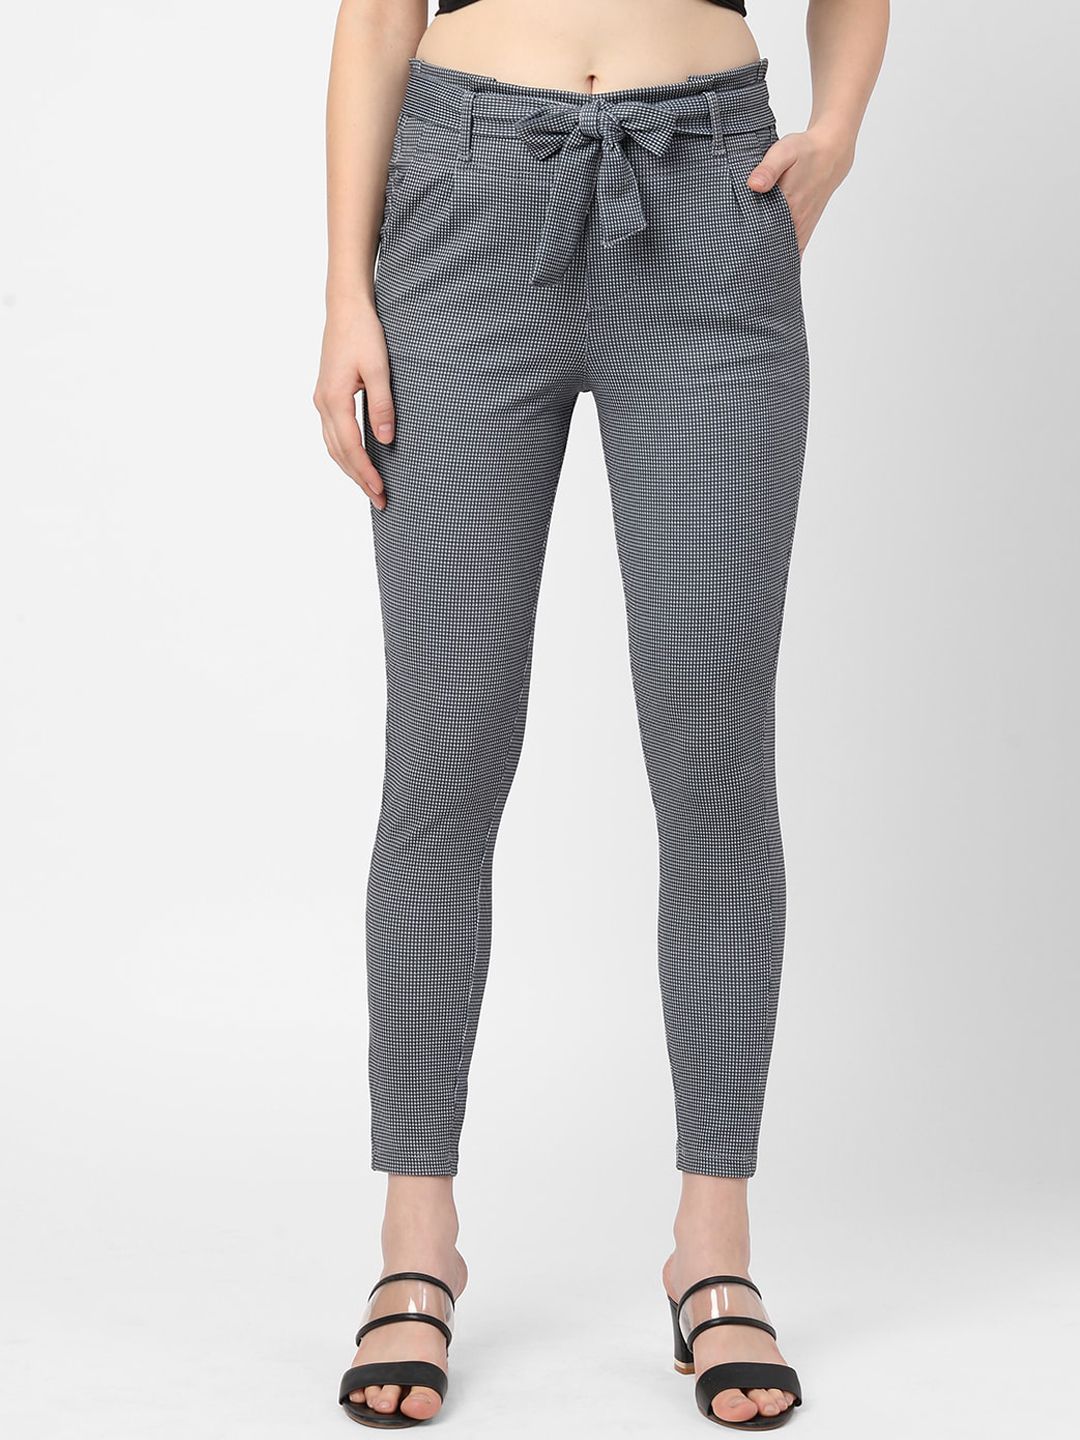 Kraus Jeans Women Grey Textured Comfort Slim Fit High-Rise Peg Trousers Price in India